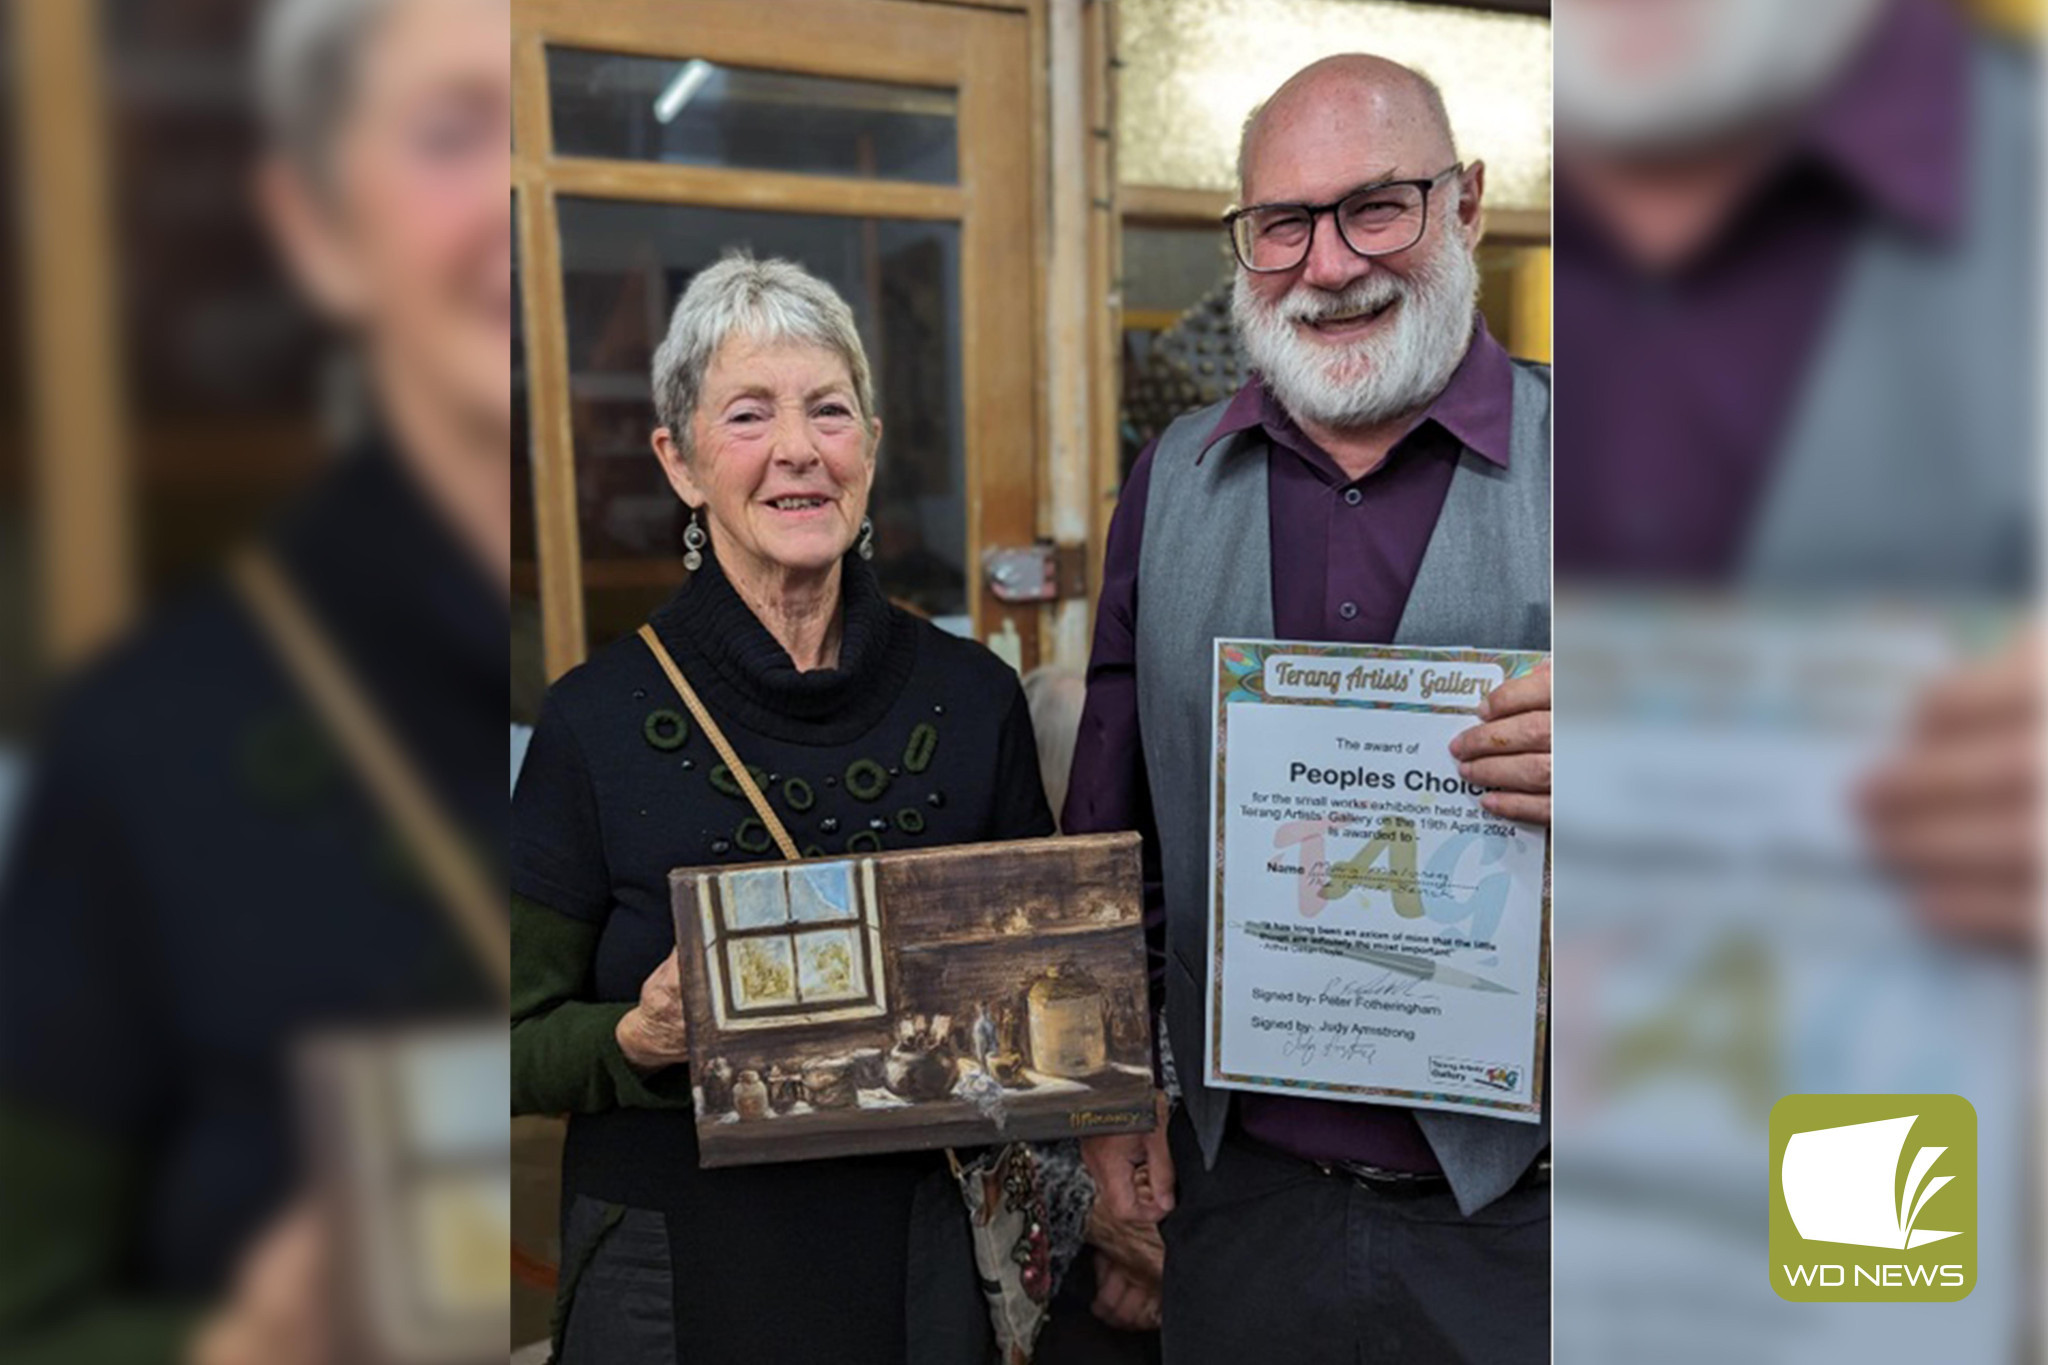 Officially open: Margaret Moloney and Peter ‘Fozz’ Fotheringham were among the award winners at the official opening of the Terang Artists’ Gallery.